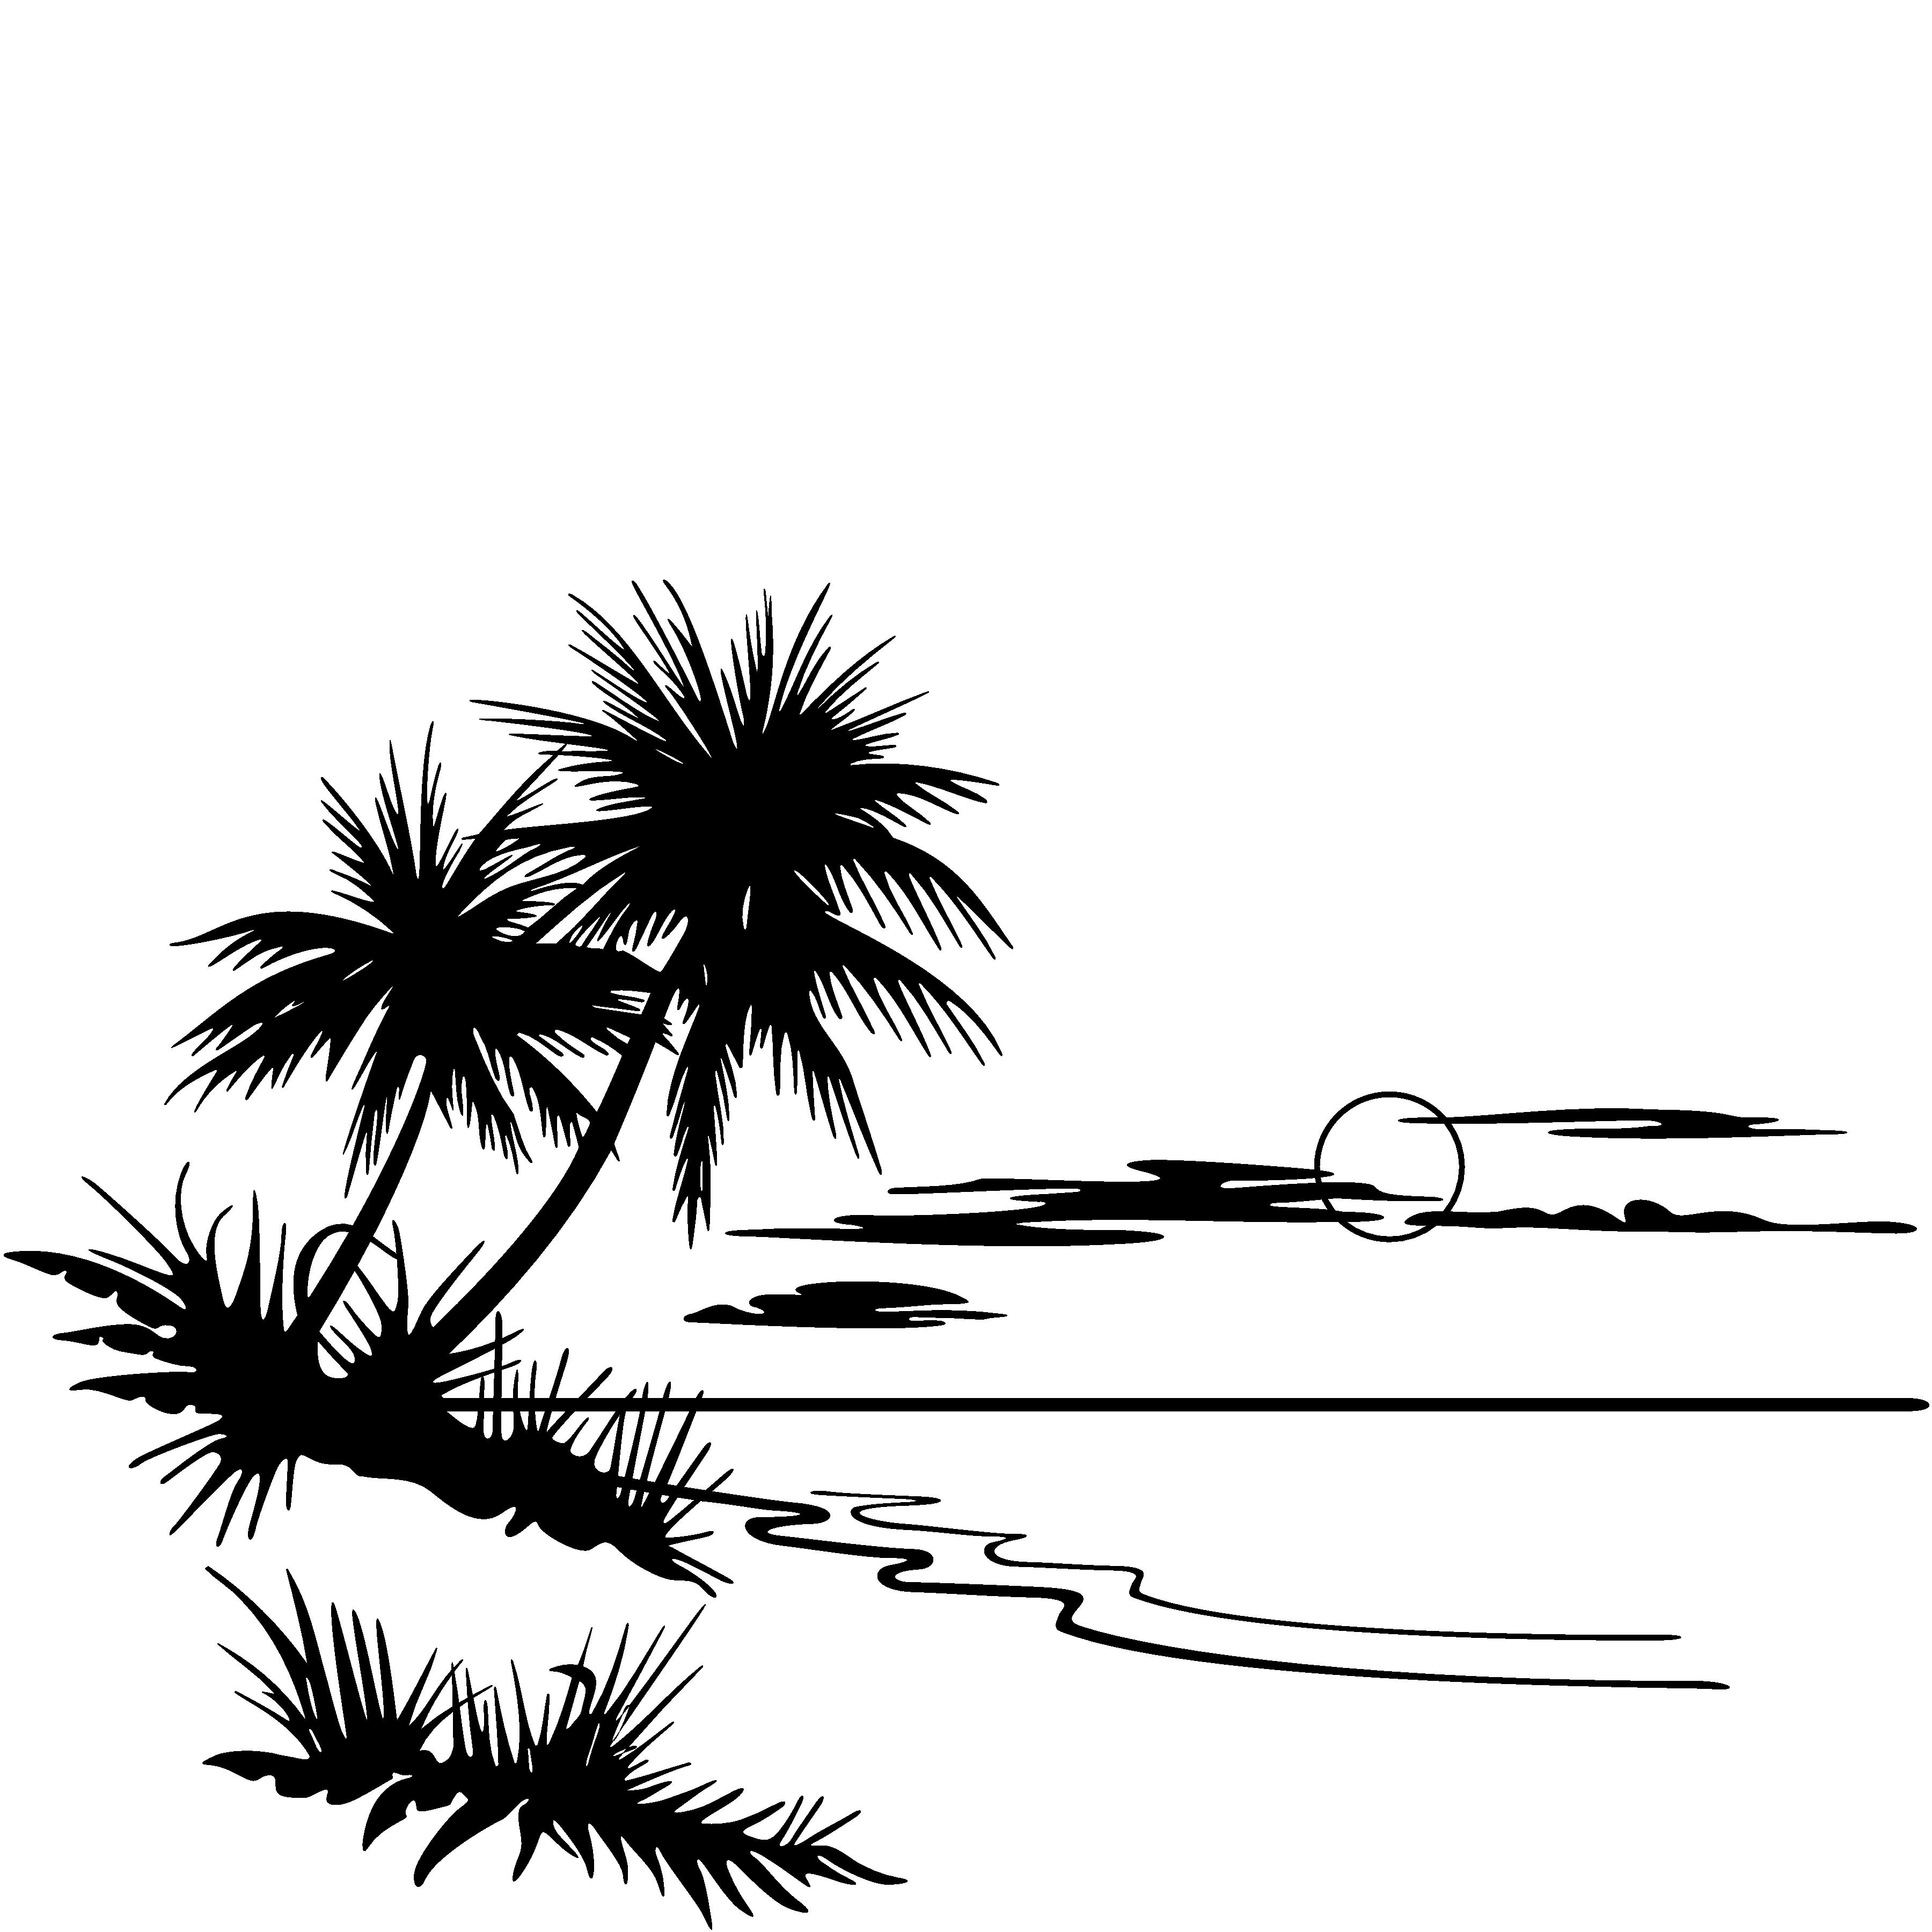 Ocean Clipart Black And White   Clipart Panda   Free Clipart Images